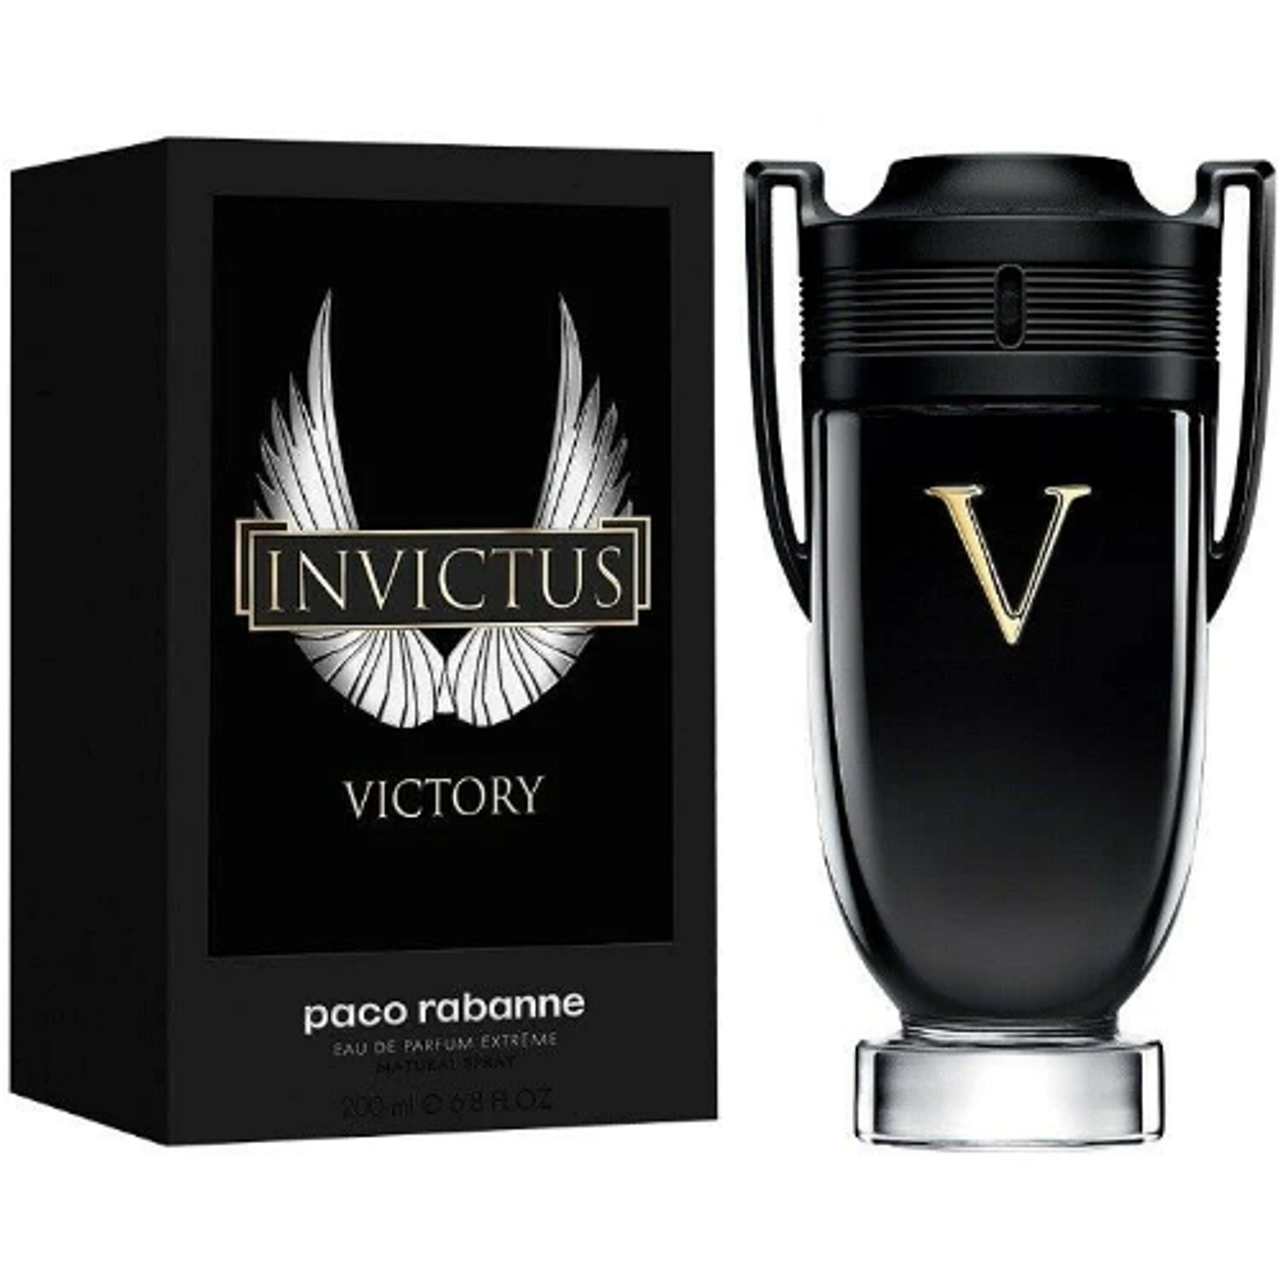 PACO INVICTUS VICTORY EDP EXTREME 3.4 OZ / 100 ML FOR MEN (NEW IN